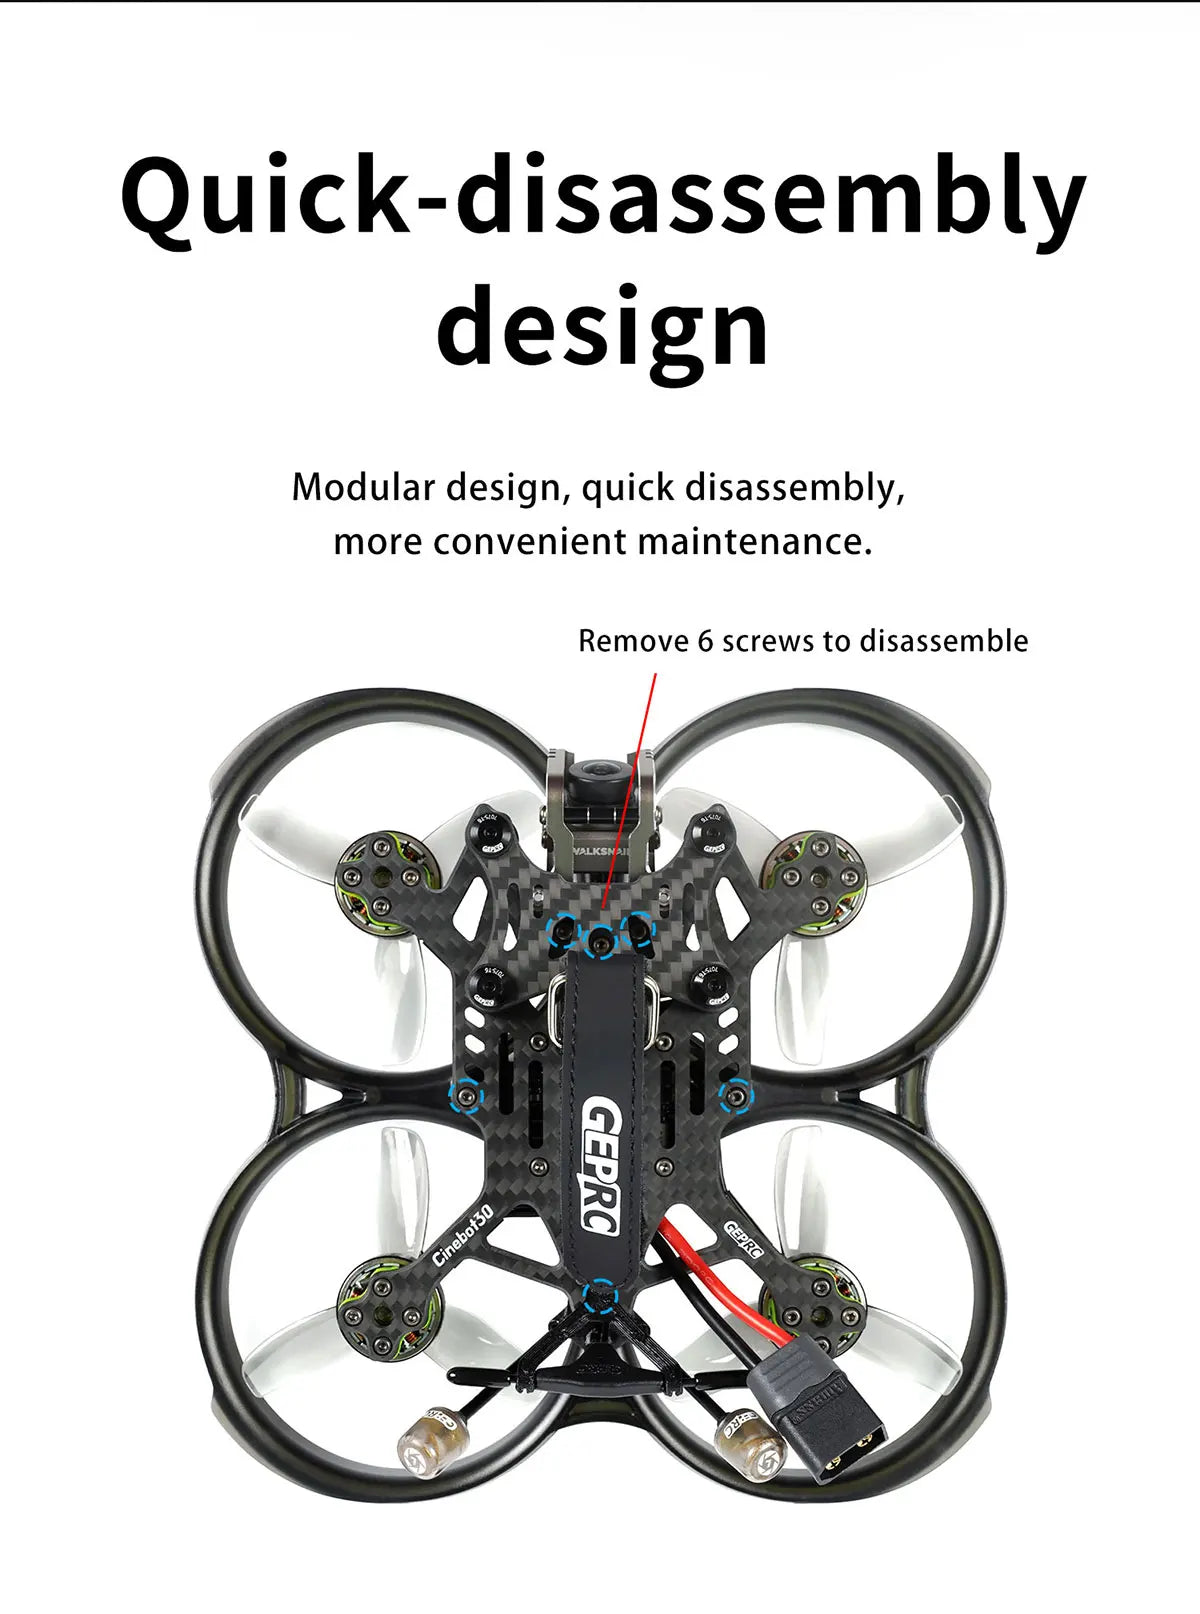 GEPRC NEW Cinebot30  FPV Drone, Quick-disassembly design Cinebot3o easy to disassemble 